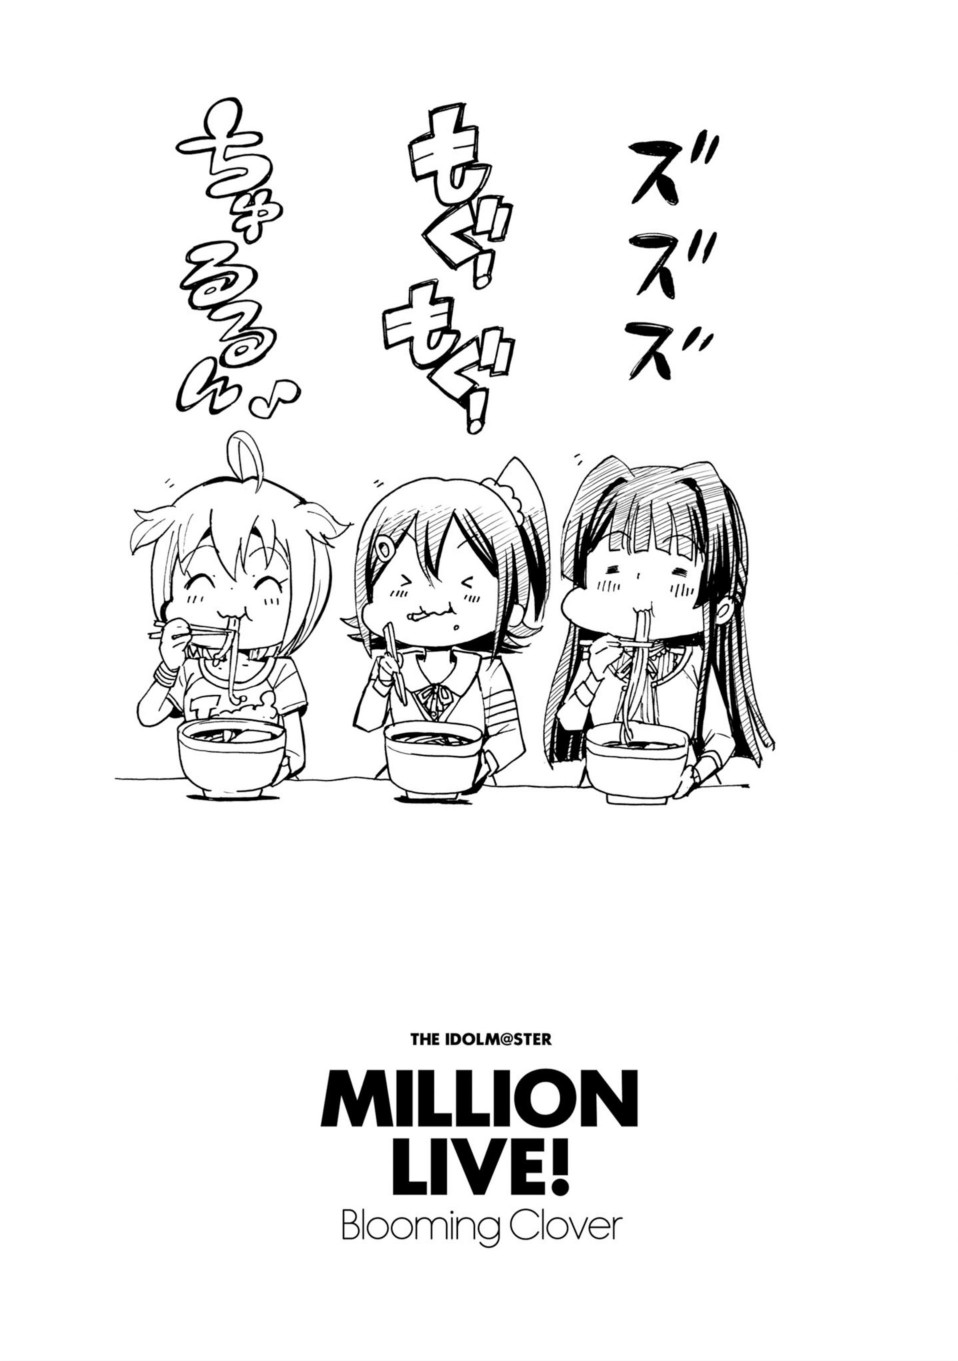 THE IDOLM@STER MILLION LIVE! Blooming Clover - 15話 - 1